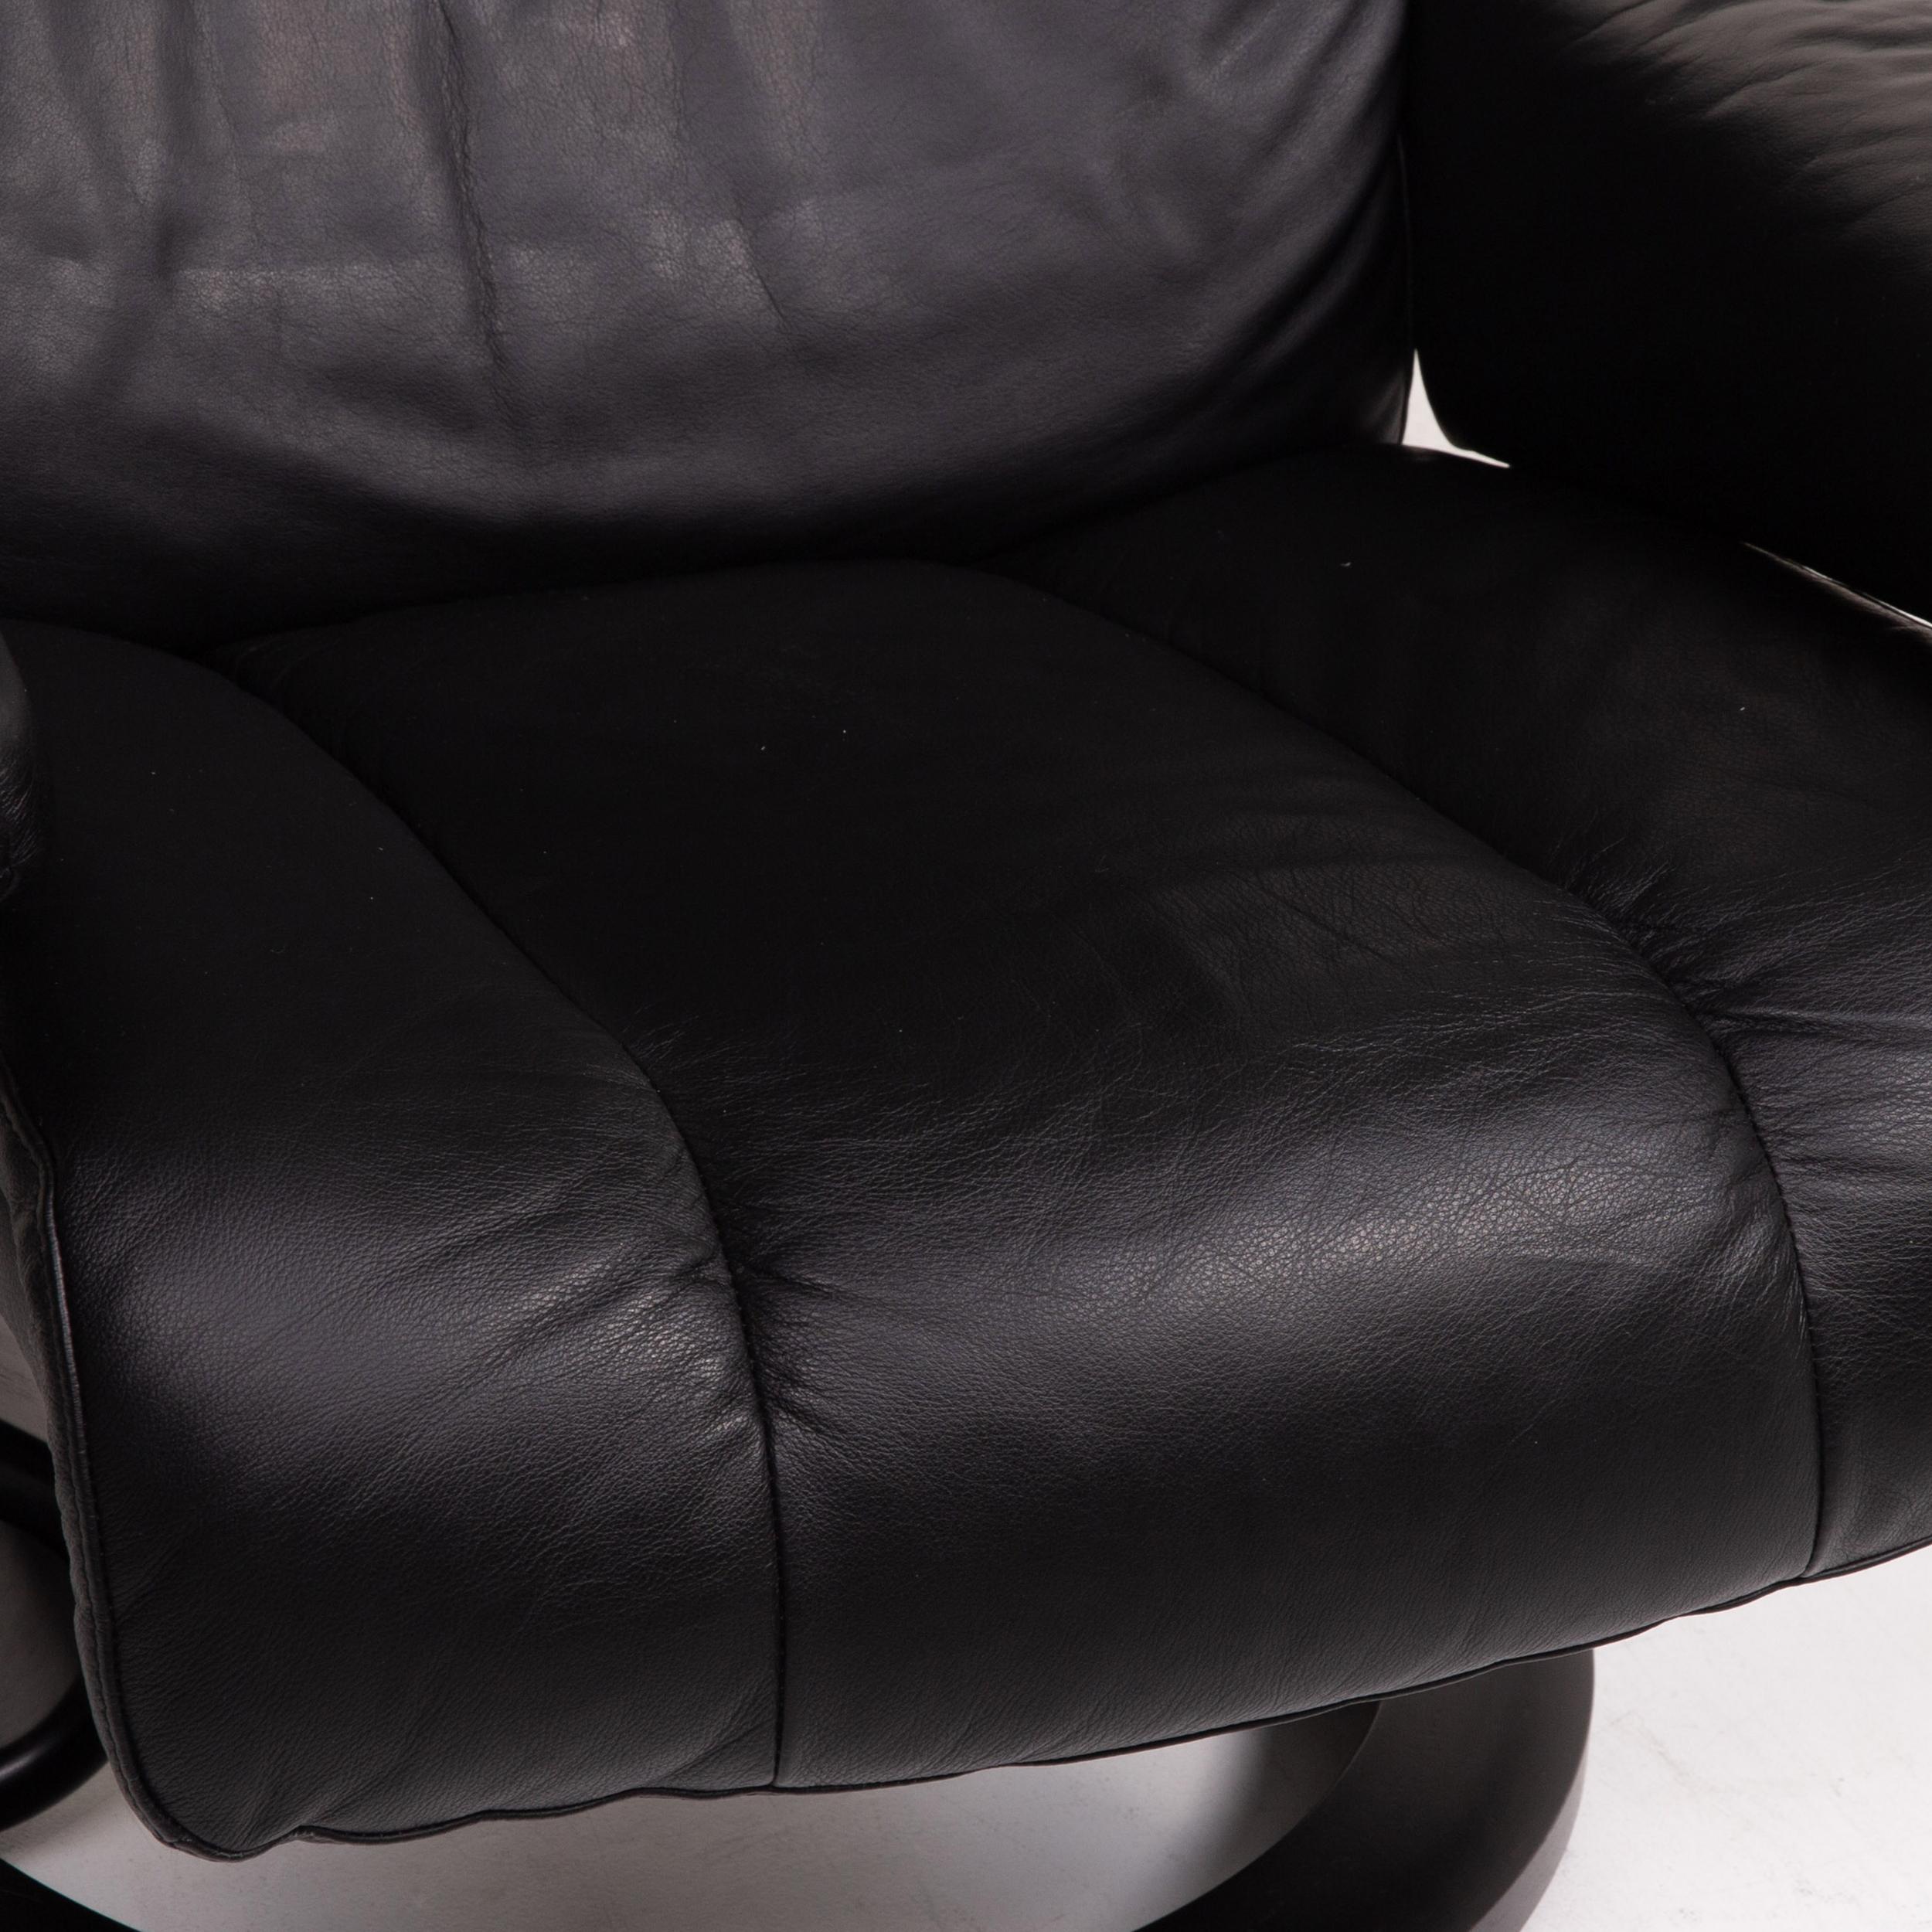 Norwegian Stressless Memphis Leather Armchair Size M Incl. Black Stool Function Relax